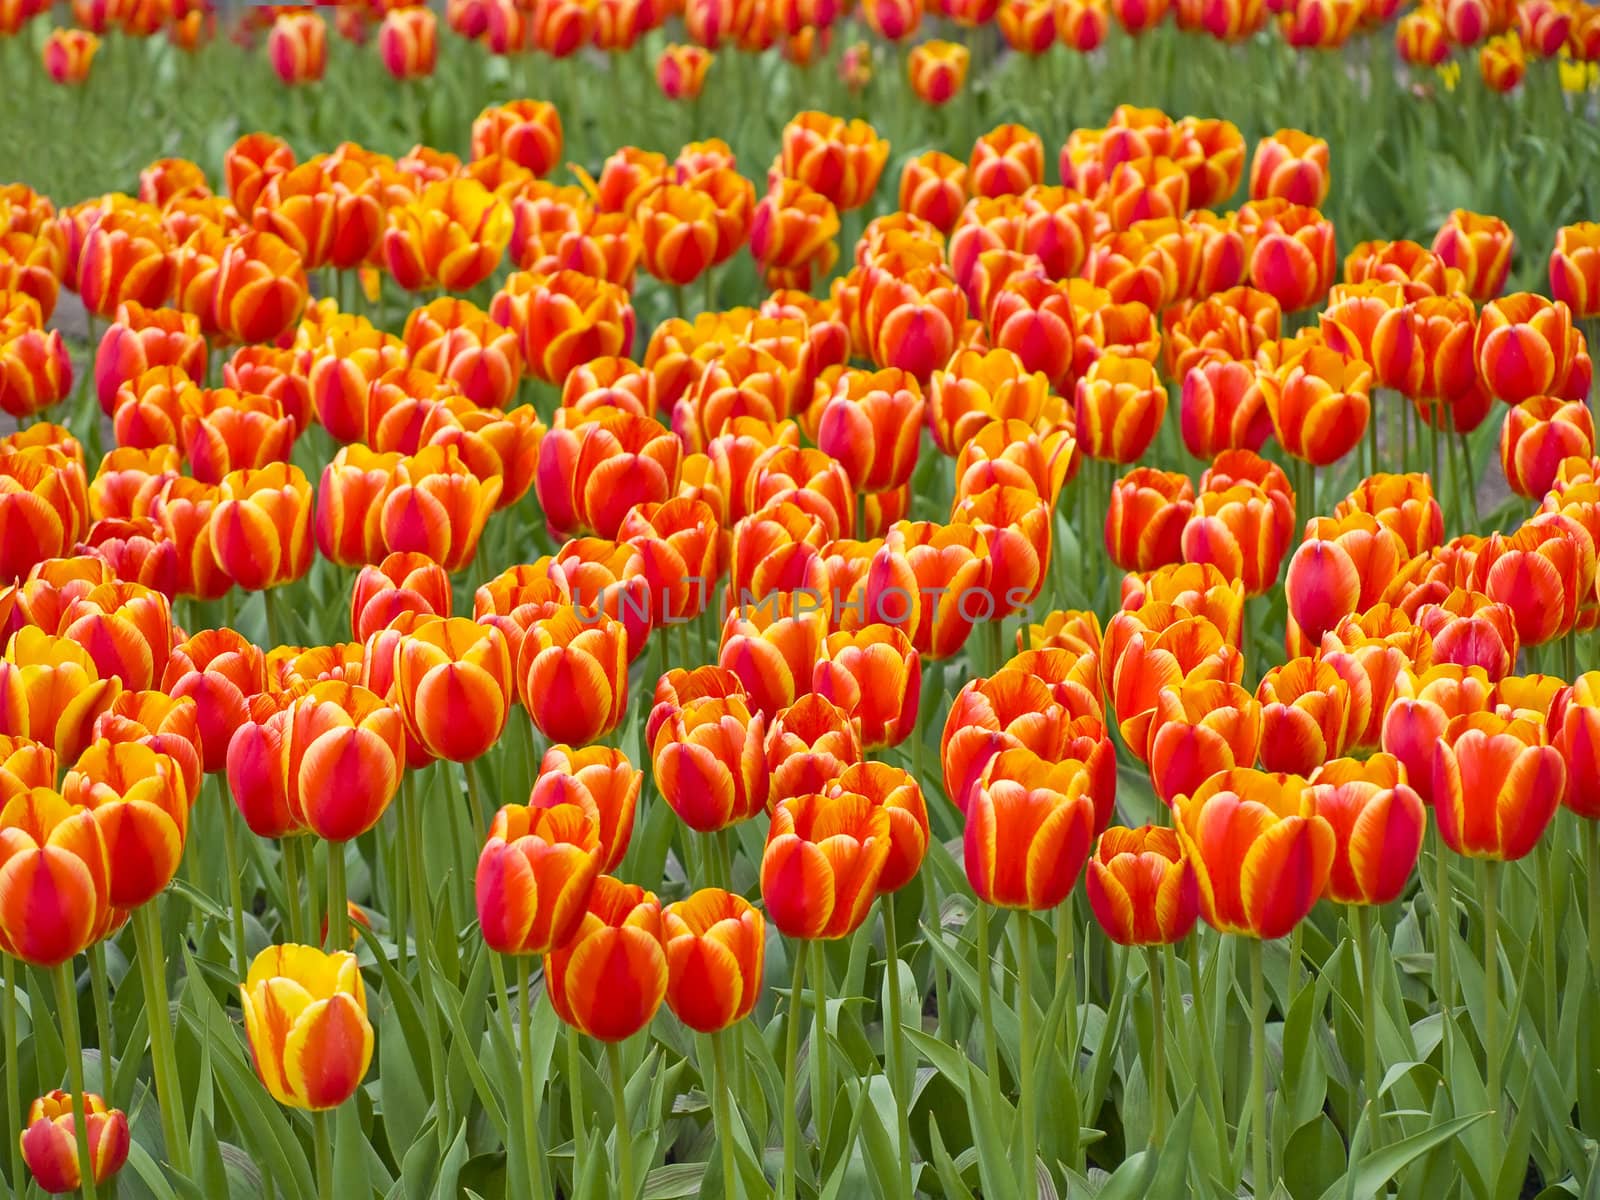 Field of the spring red and yellow tulips